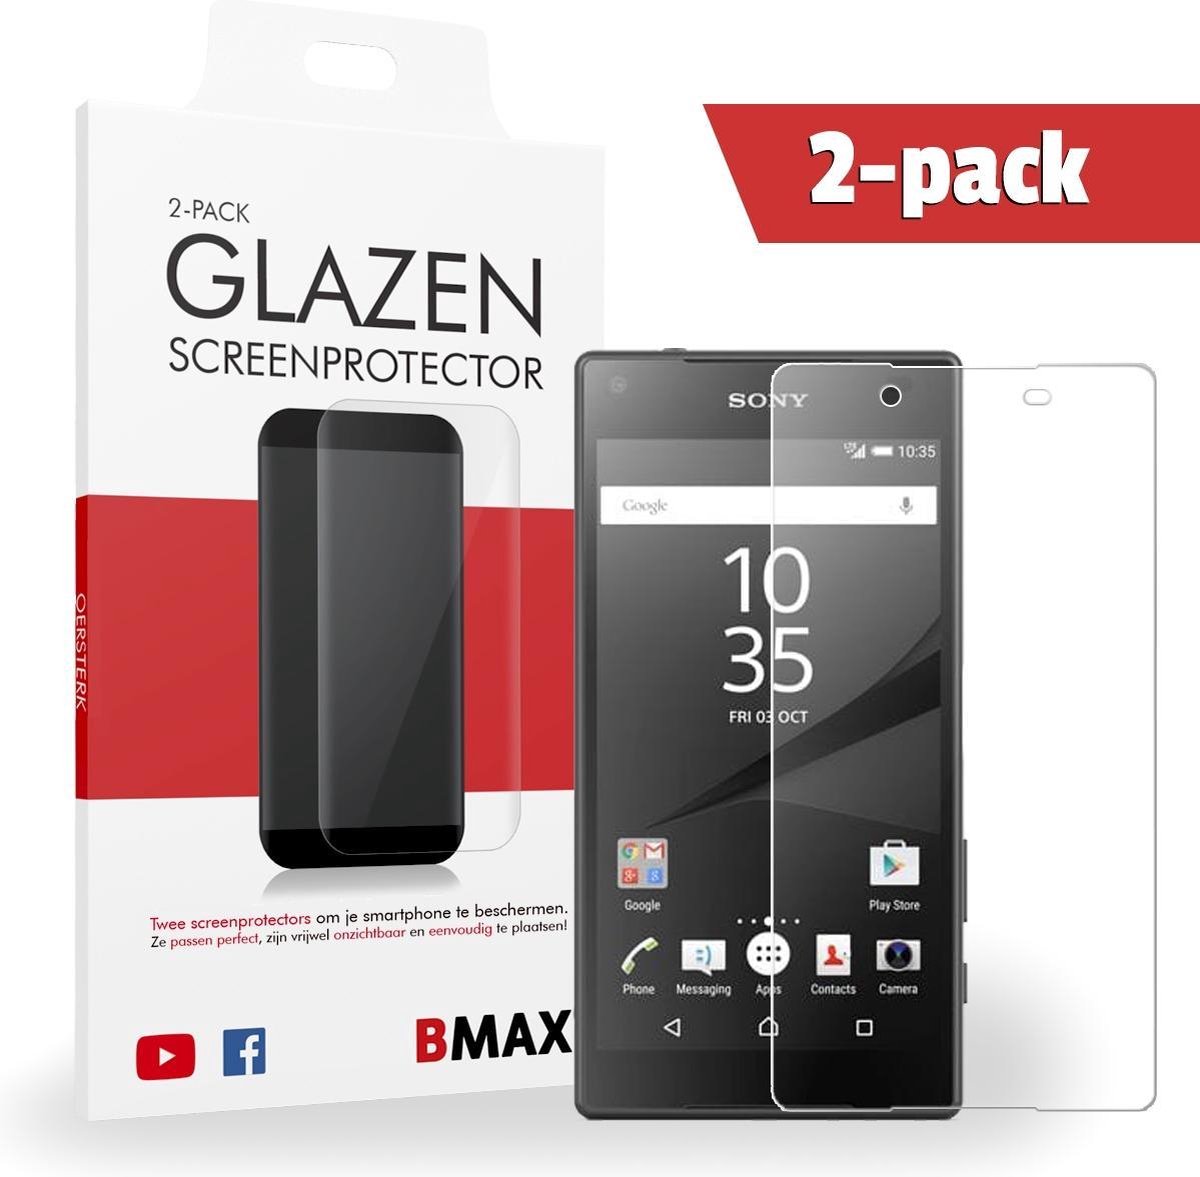 2-pack Sony Xperia Z5 Compact Screenprotector - Glass - 2.5d